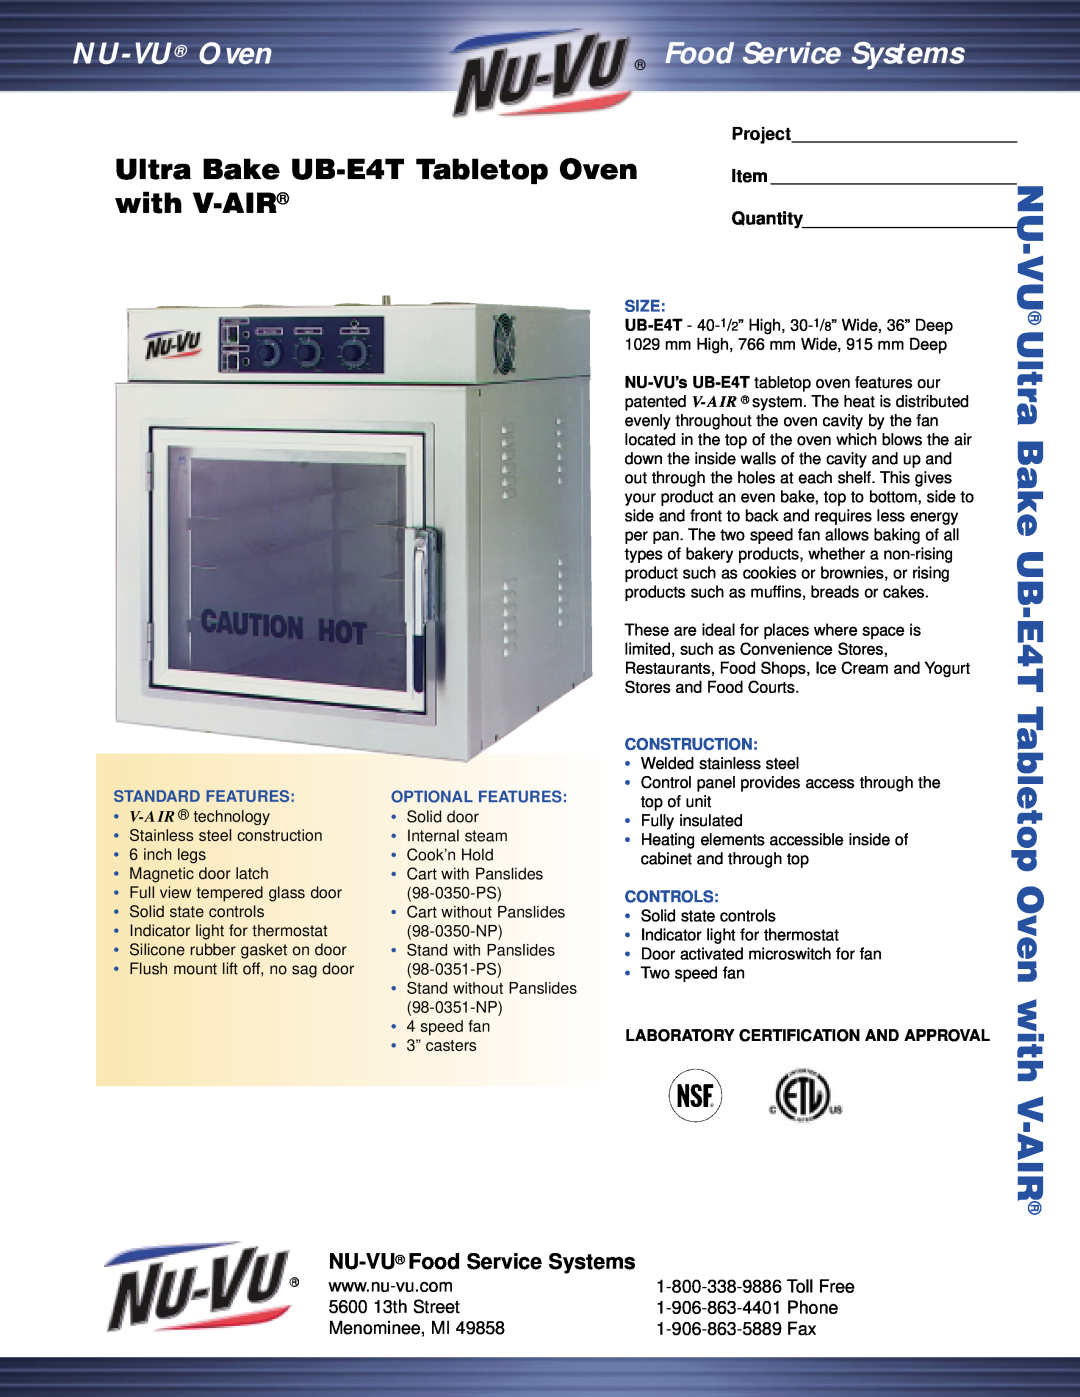 Middleby Cooking Systems Group manual Ultra Bake UB-E4TTabletop Oven with V-AIR, NU-VU Food Service Systems, Phone 